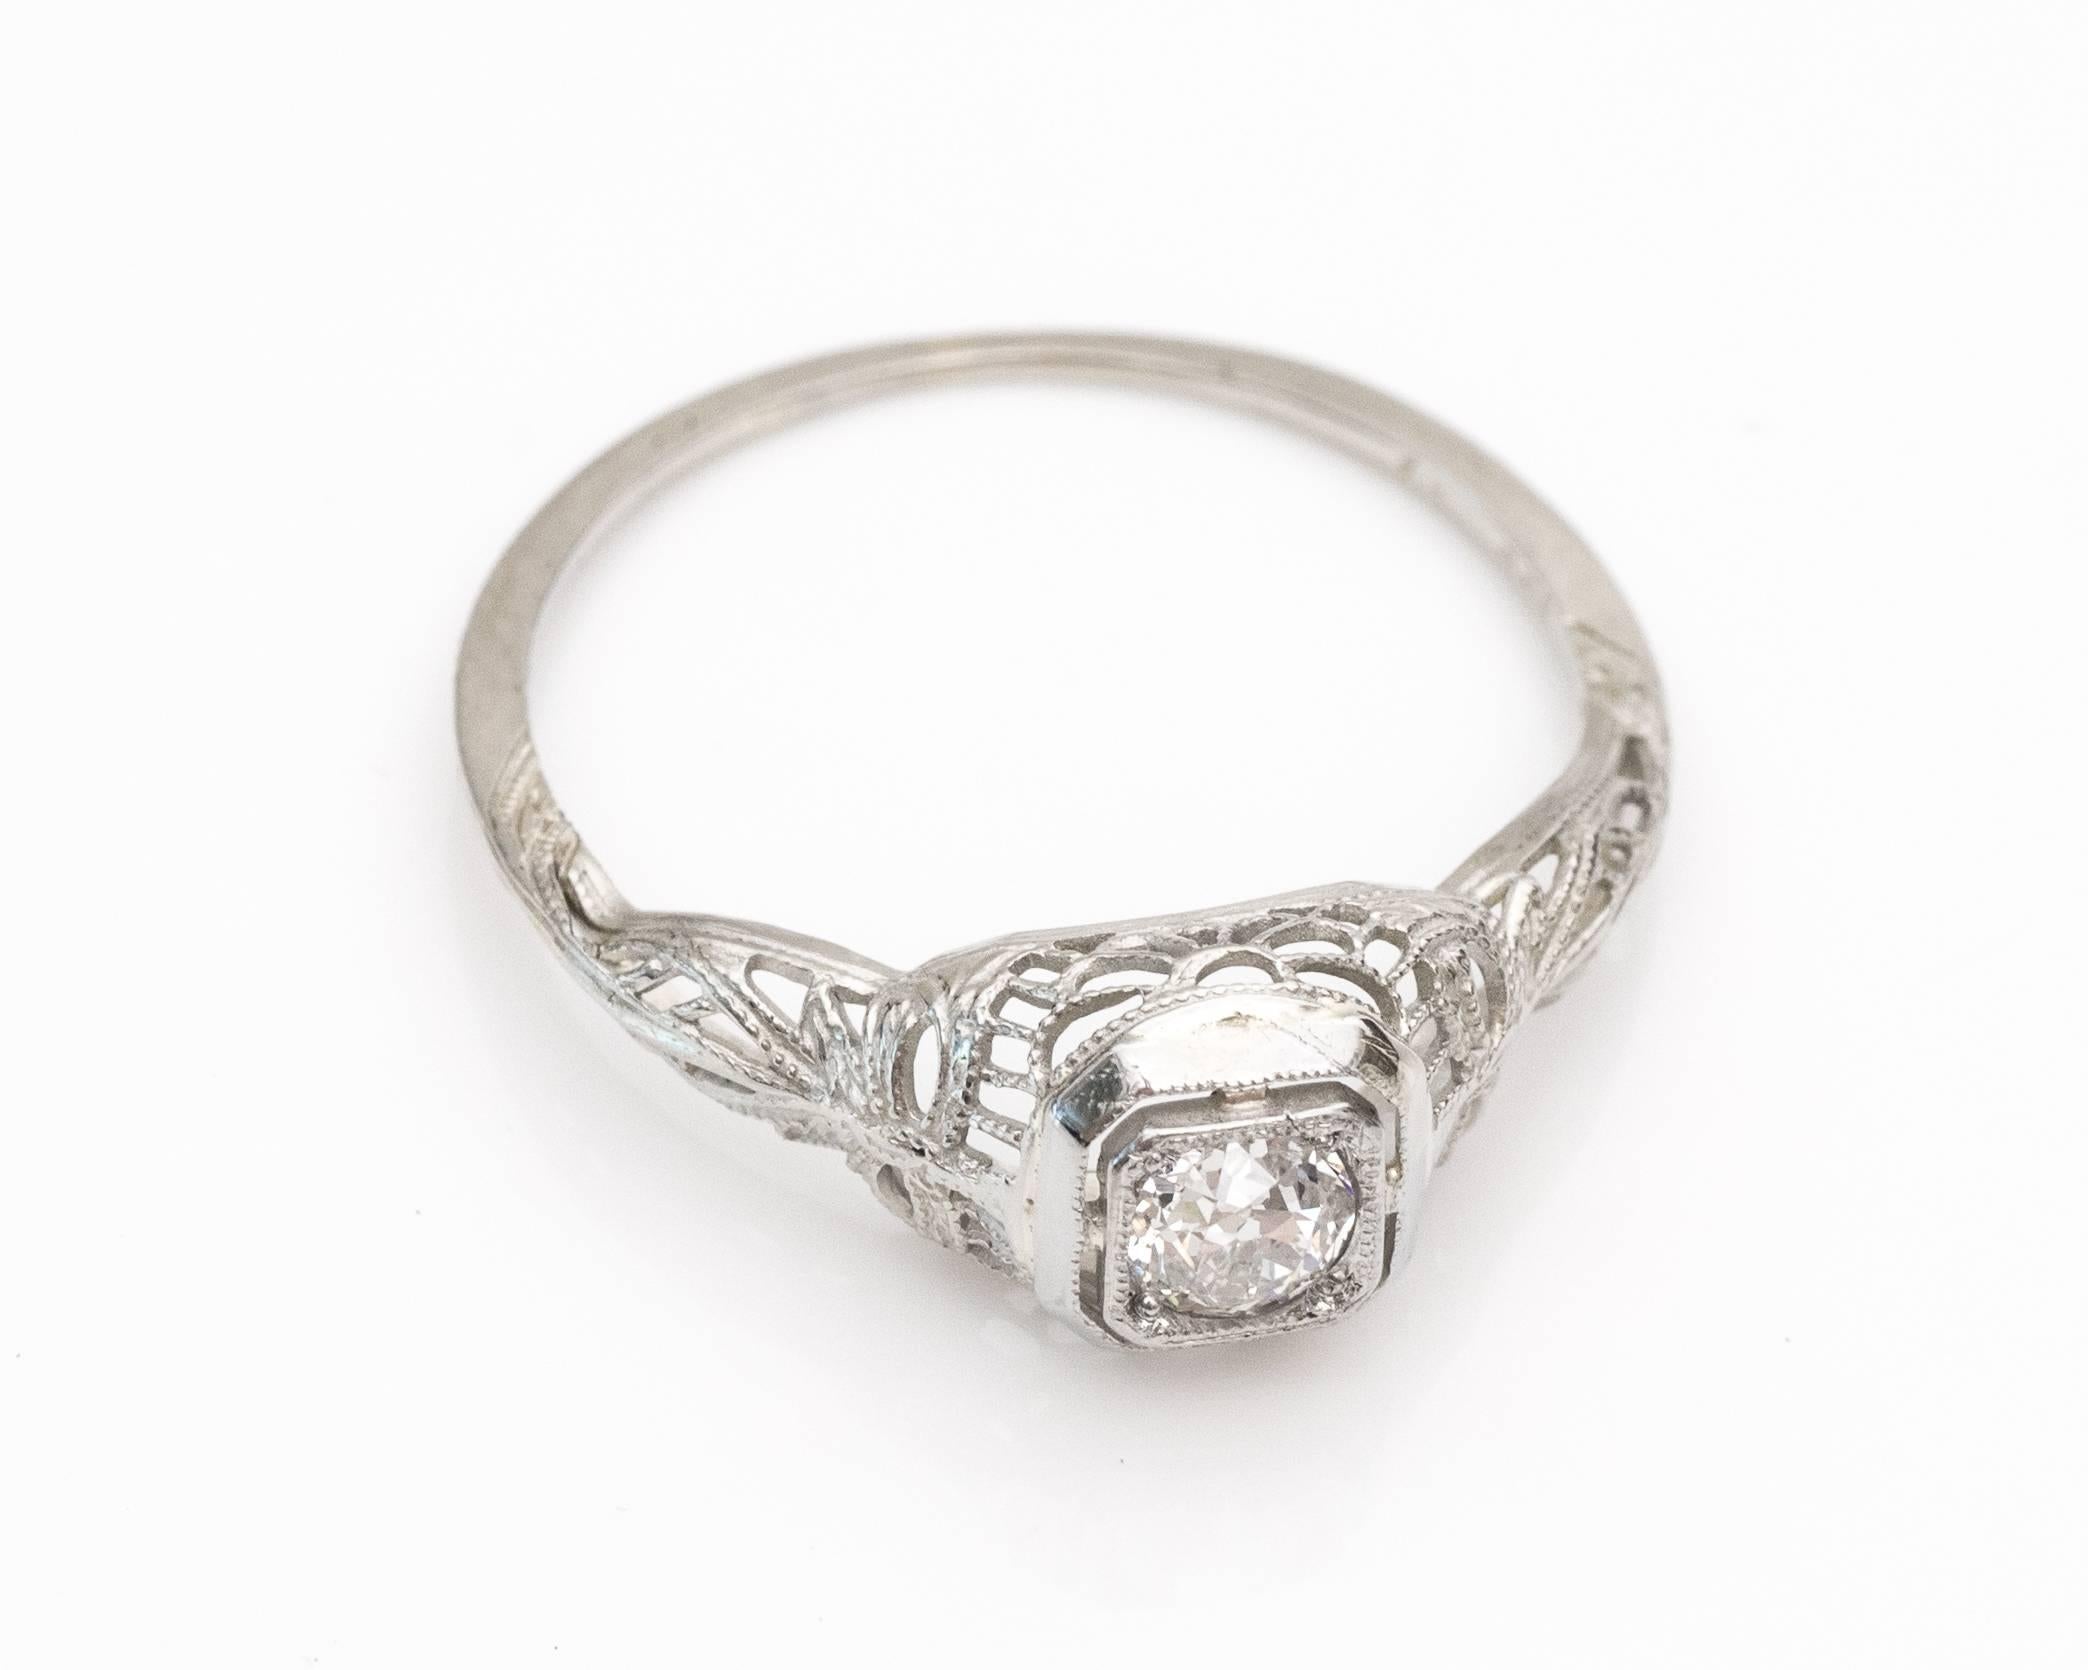 1925 Art Deco .25 Carat Old Mine Diamond 18 Karat White Gold Engagement Ring. This filigree ring remains in amazing condition! The shine and detail of this piece makes it a true gem. The metalwork was handcrafted in 1925 with sincere attention and